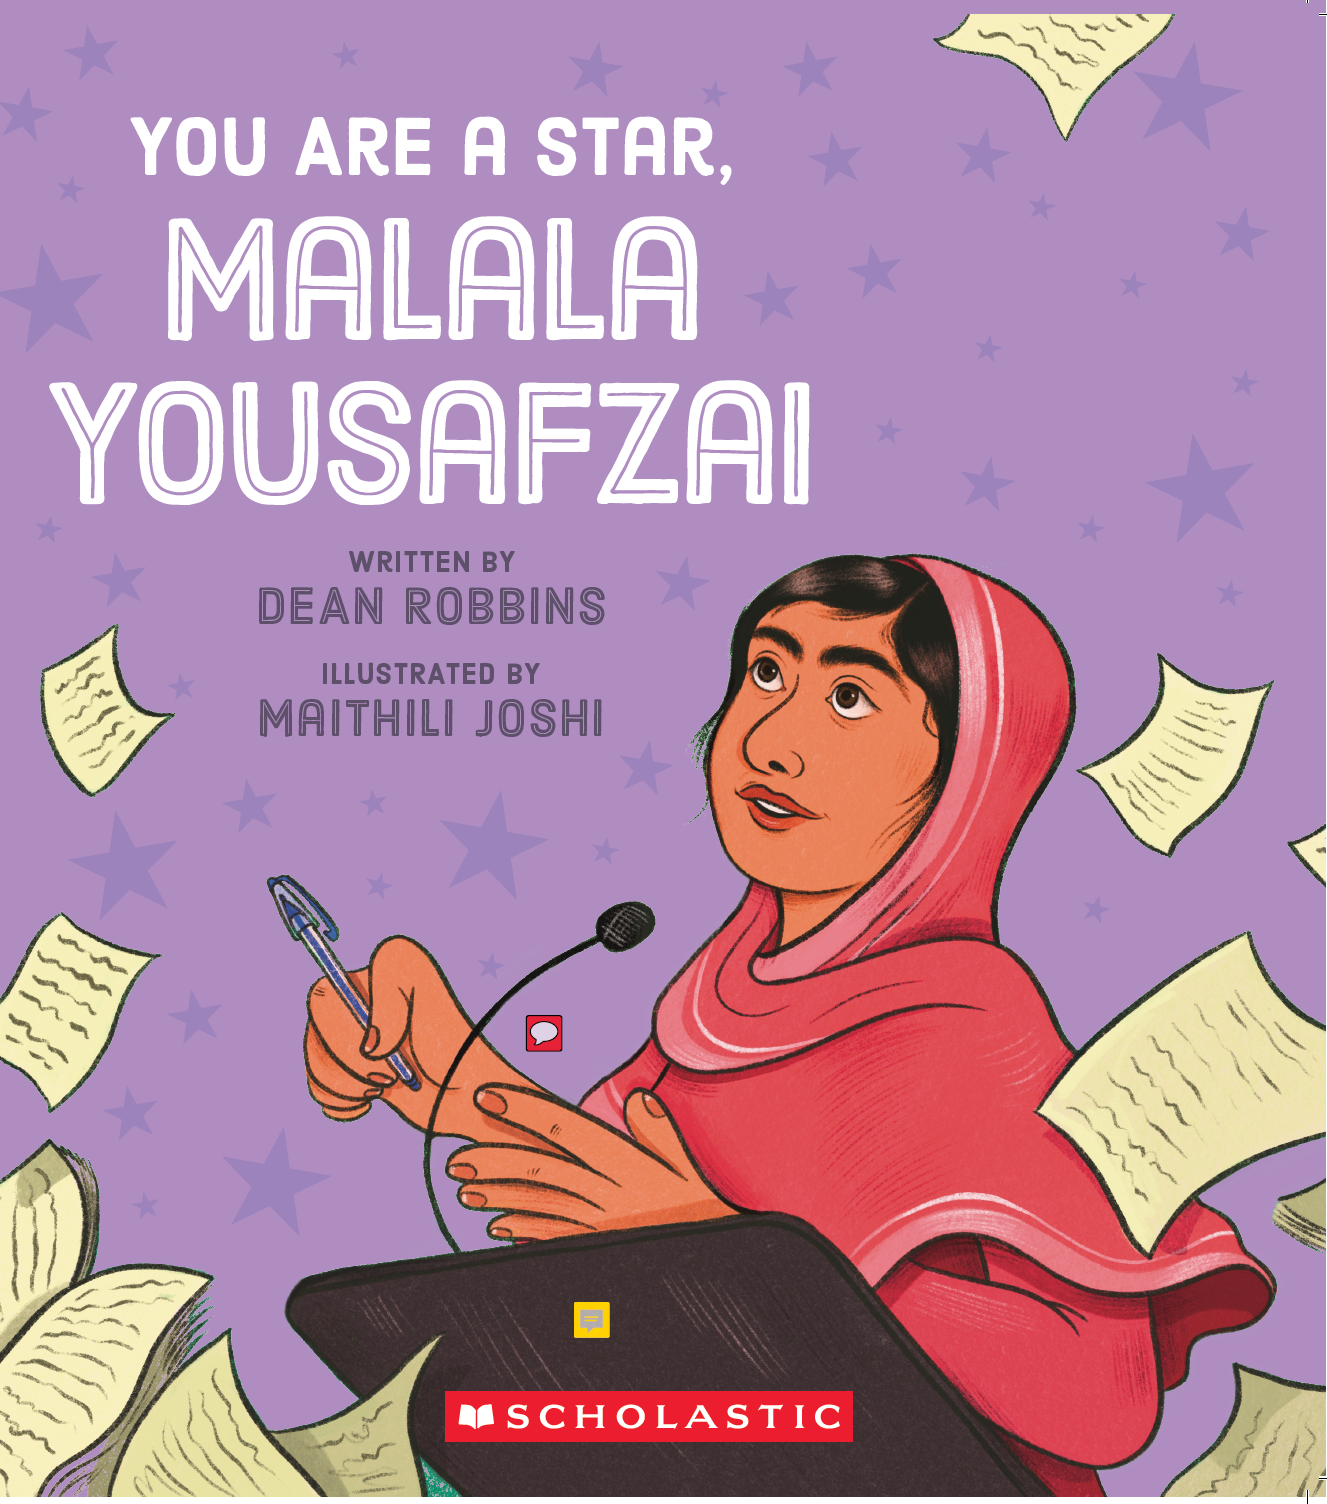 You Are a Star, Malala Yousafzai, children's book by Dean Robbins